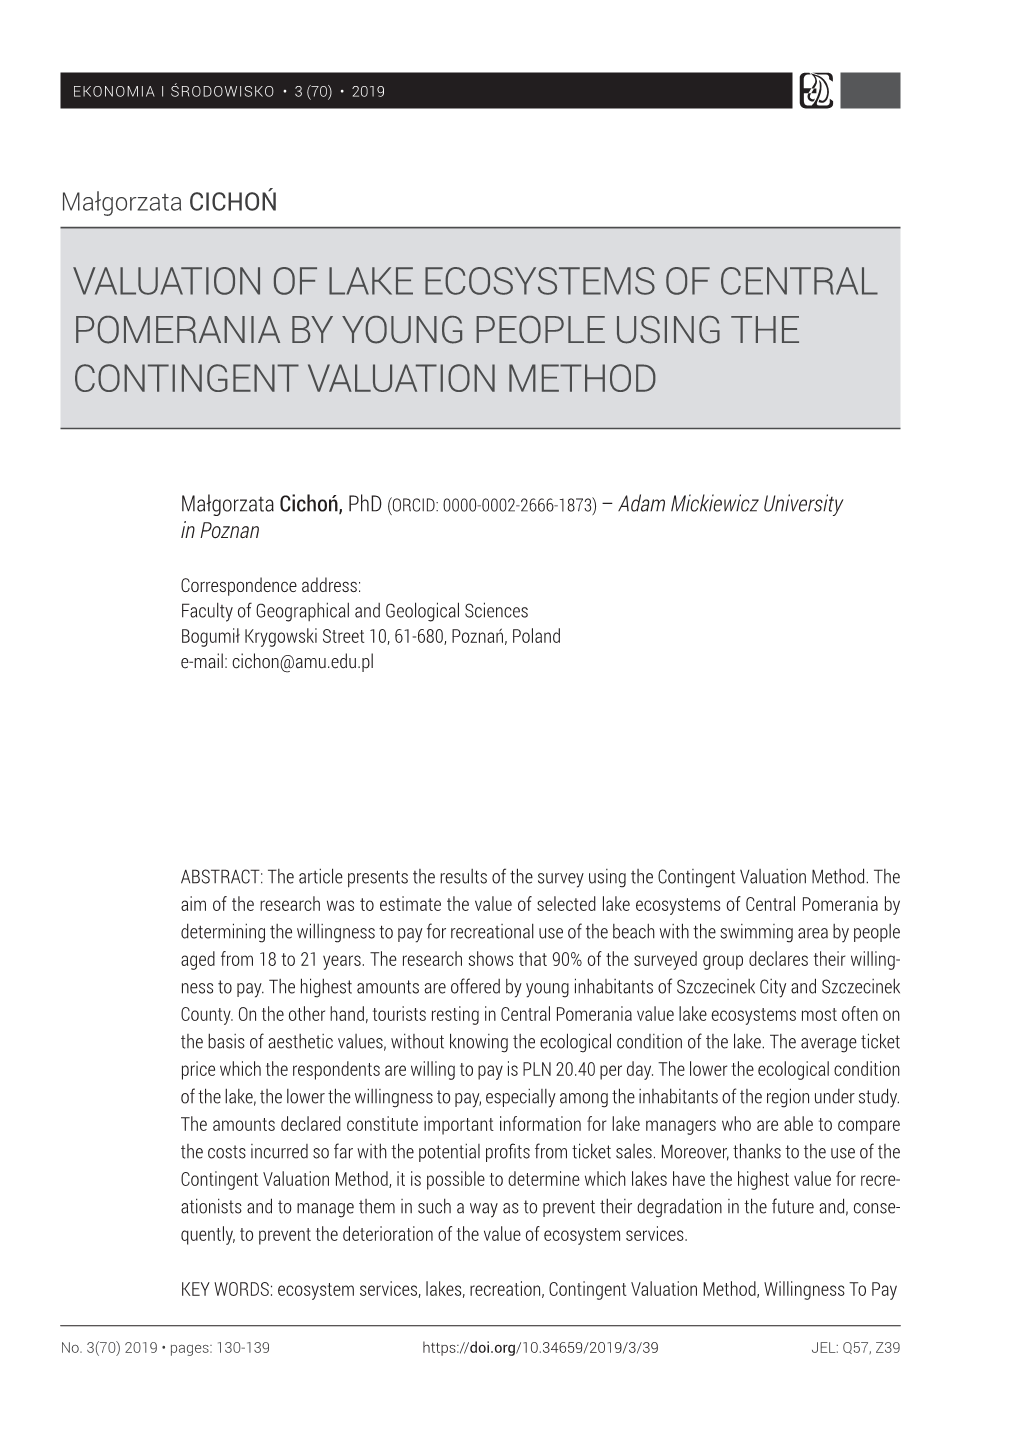 Valuation of Lake Ecosystems of Central Pomerania by Young People Using the Contingent Valuation Method